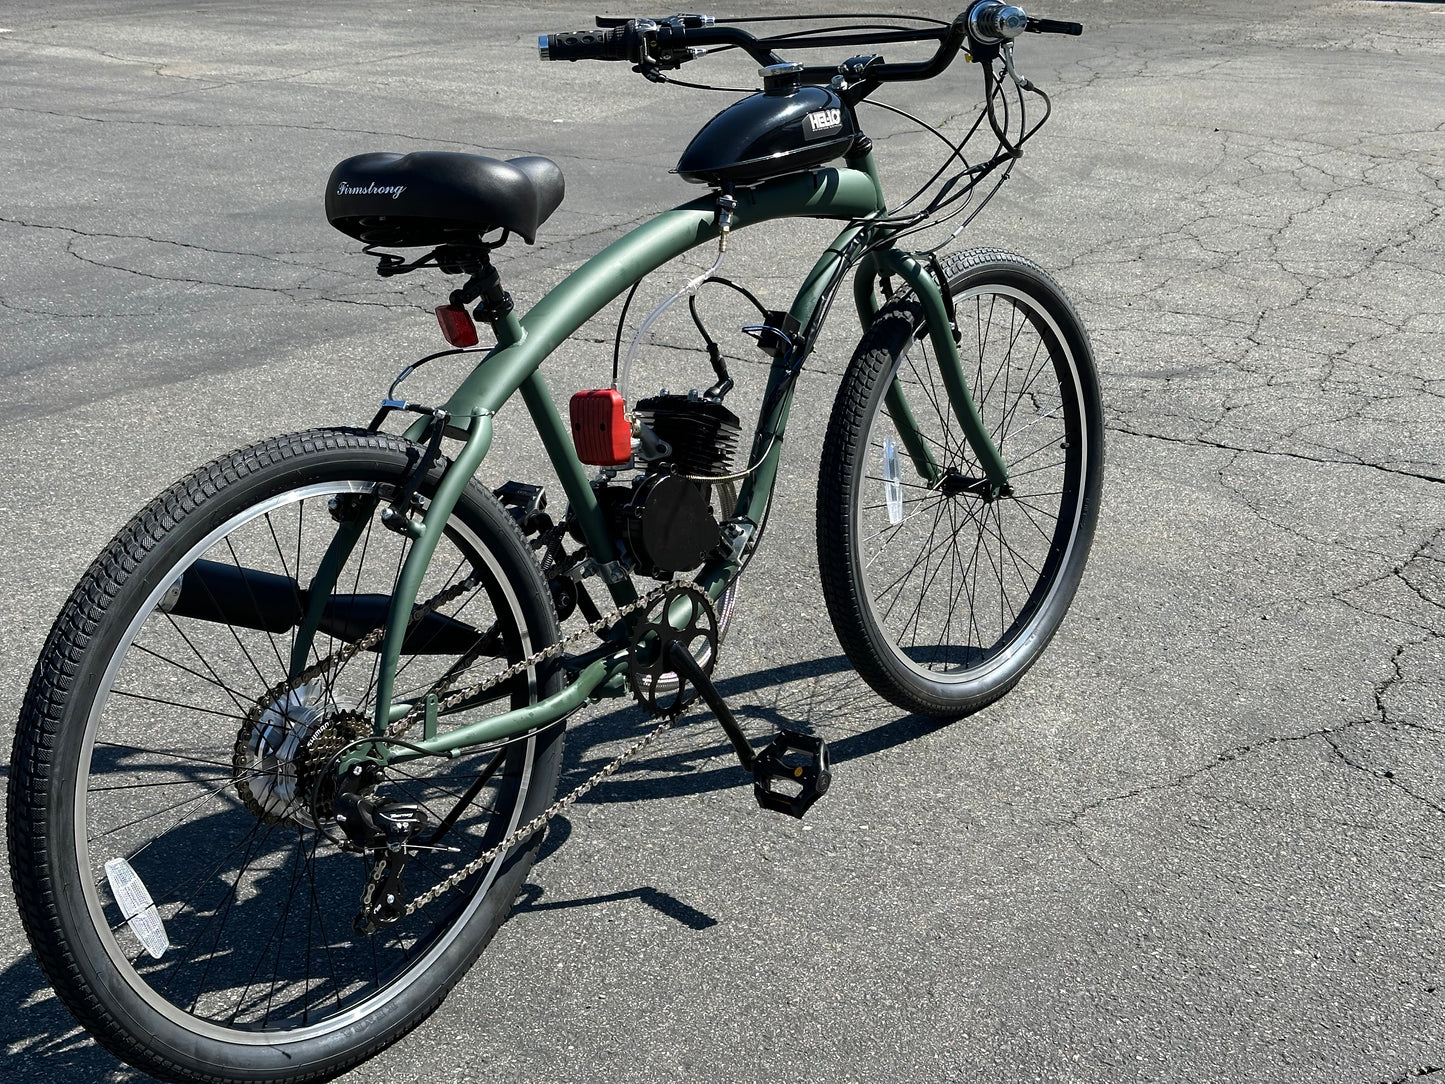 Available Now Army Green ECO 2 Stroke Motorized Bicycle